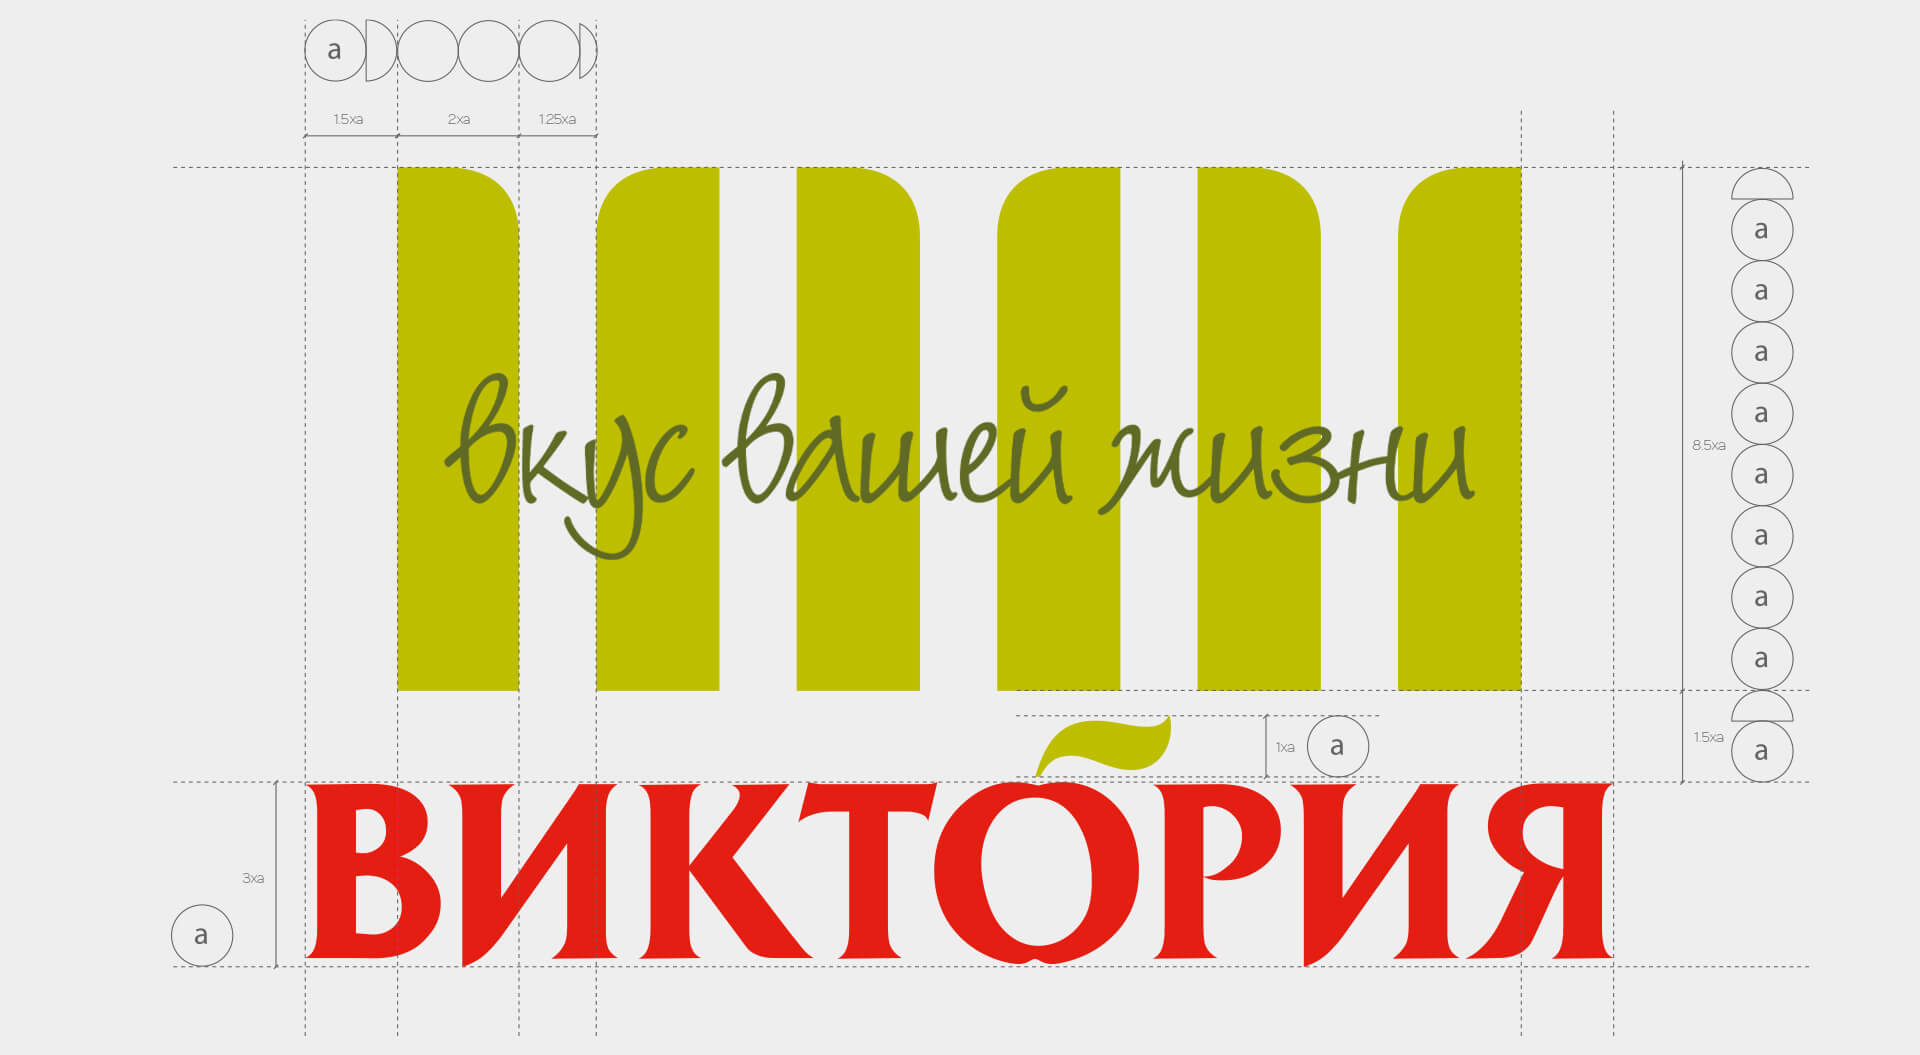 Victoria supermarkets Russia brand manual detail of shopping bag and strap-line